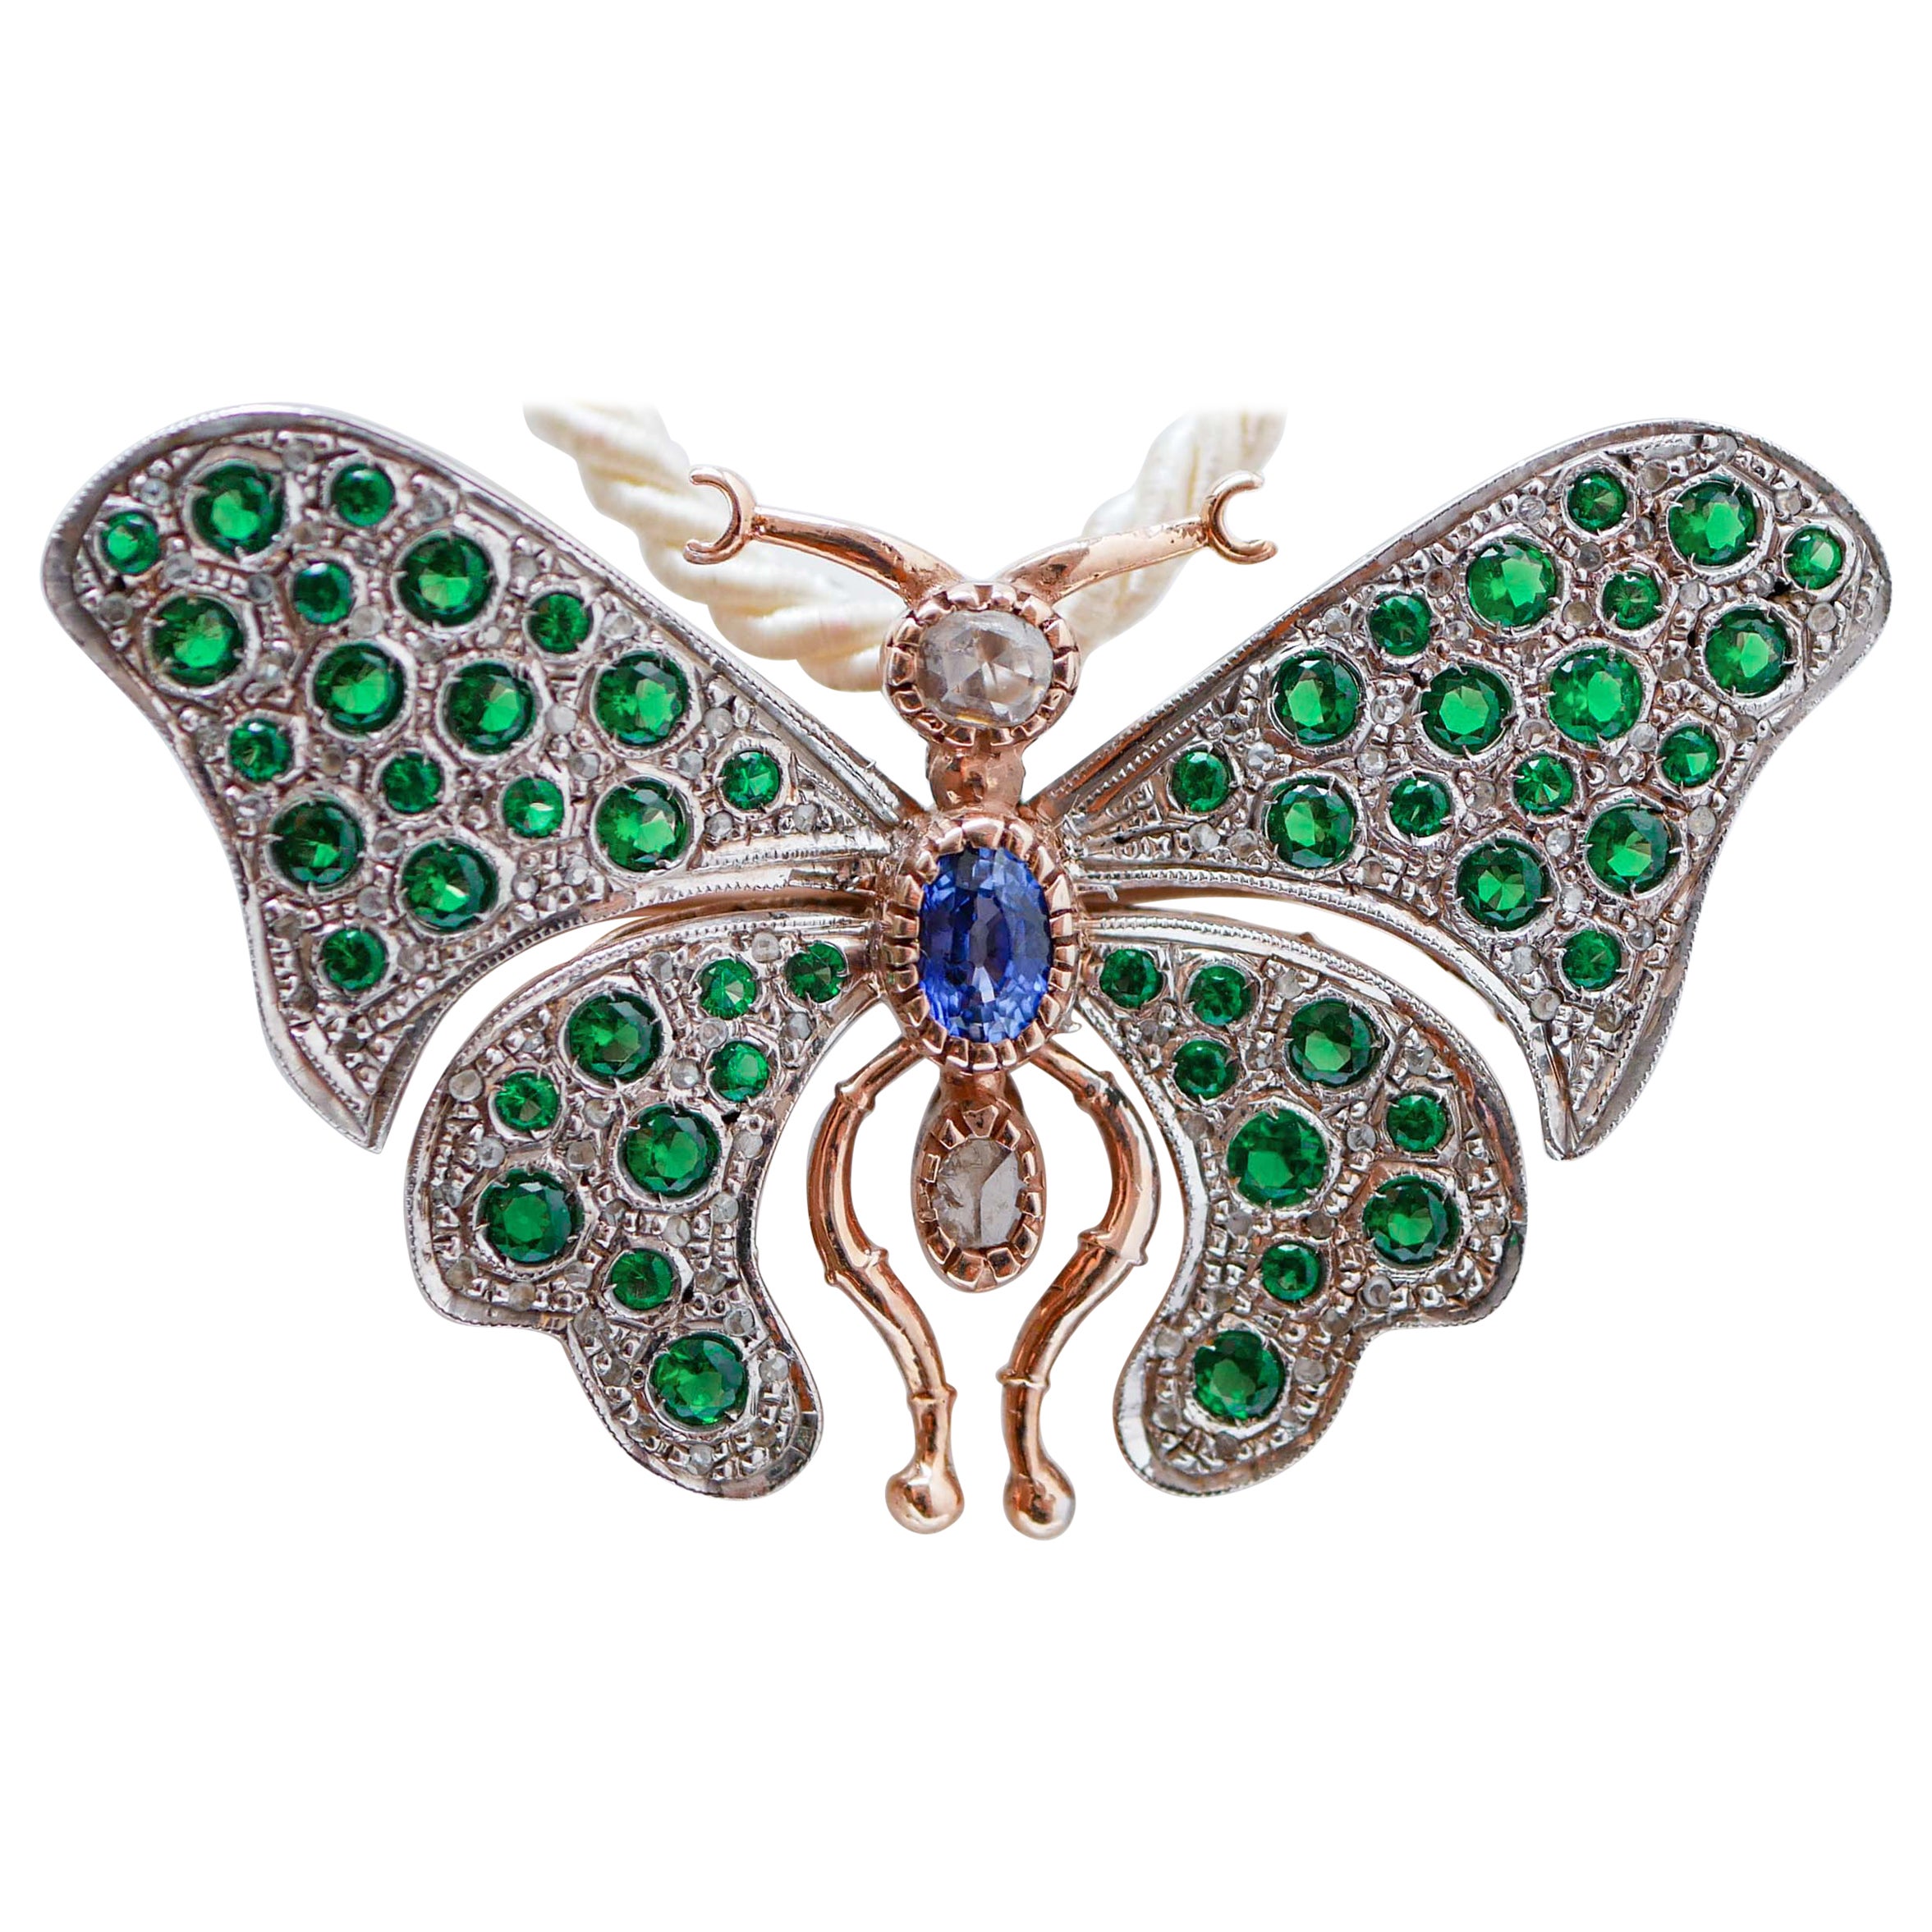 Sapphire, Diamonds, Spinel, Rose Gold and Silver Butterfly Brooch.